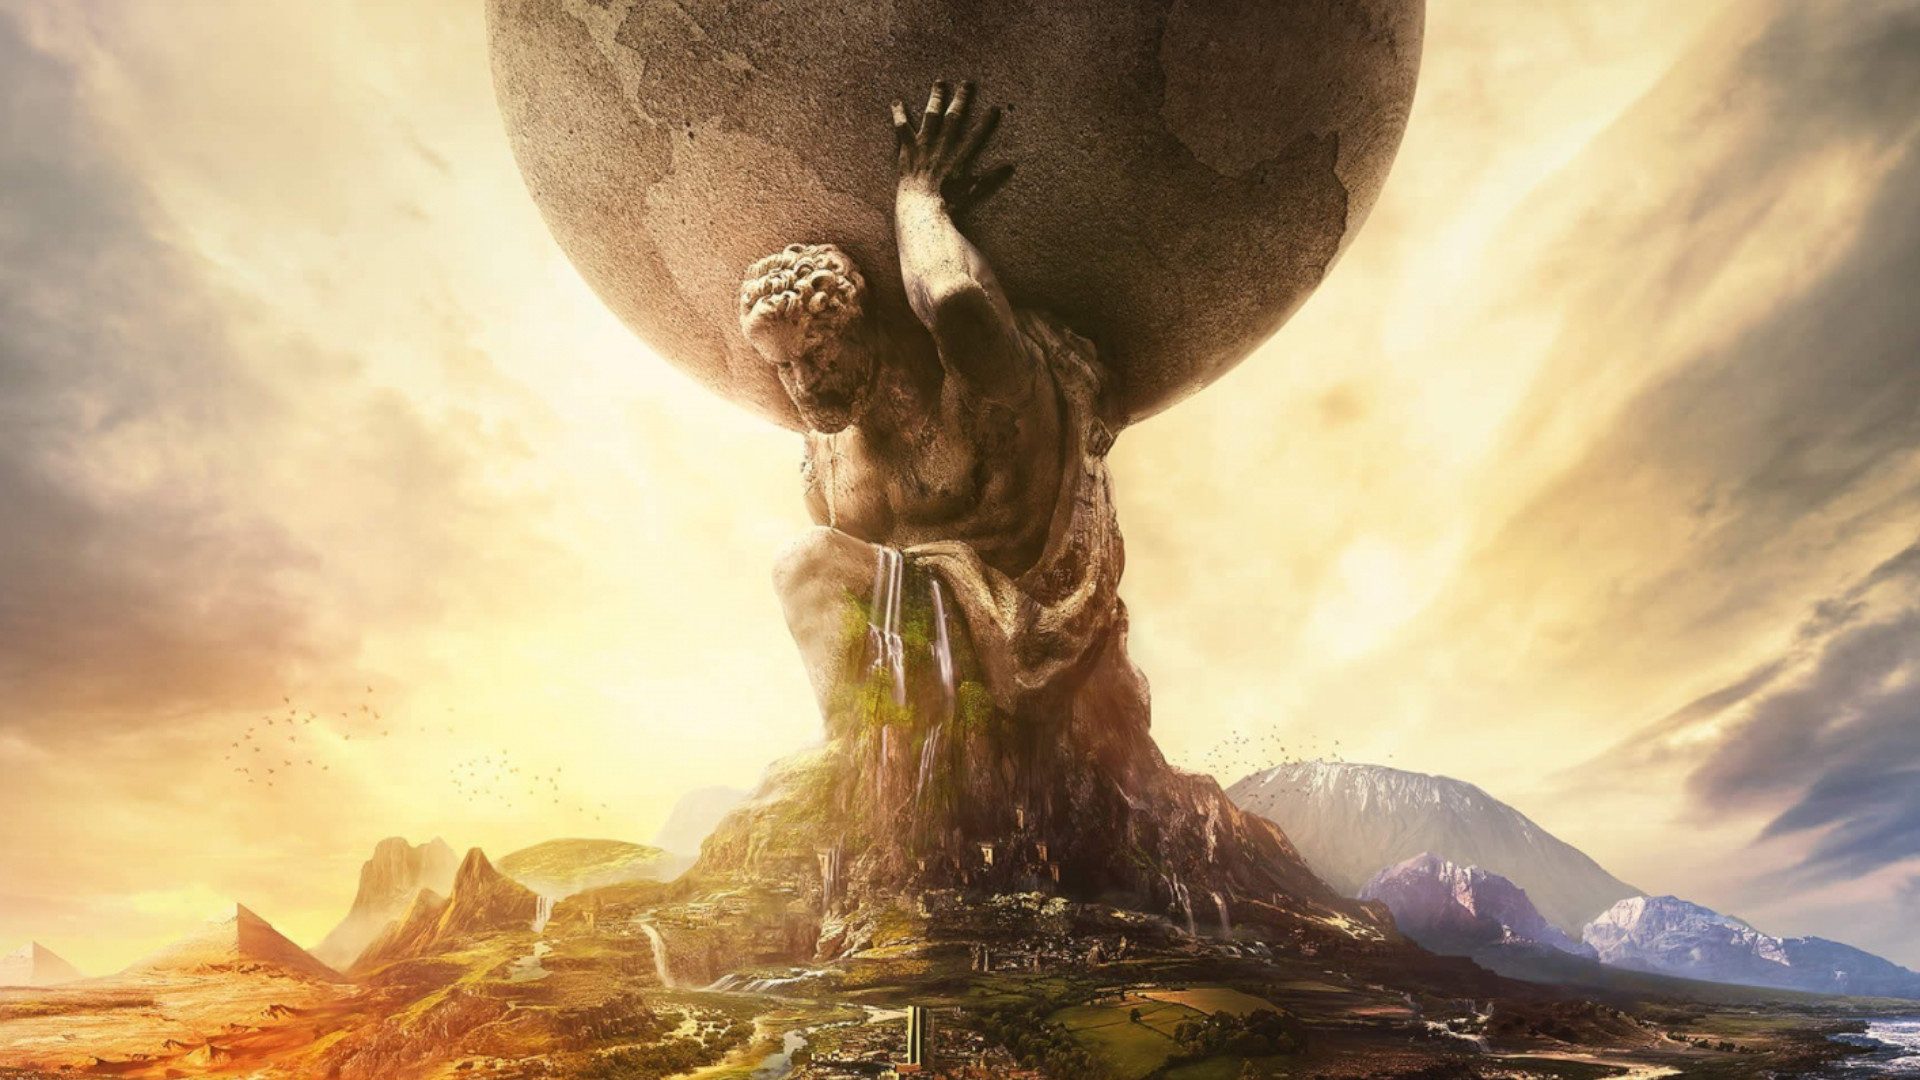 A Civilization fan is using Minecraft to remake all of Civ 6’s world wonders